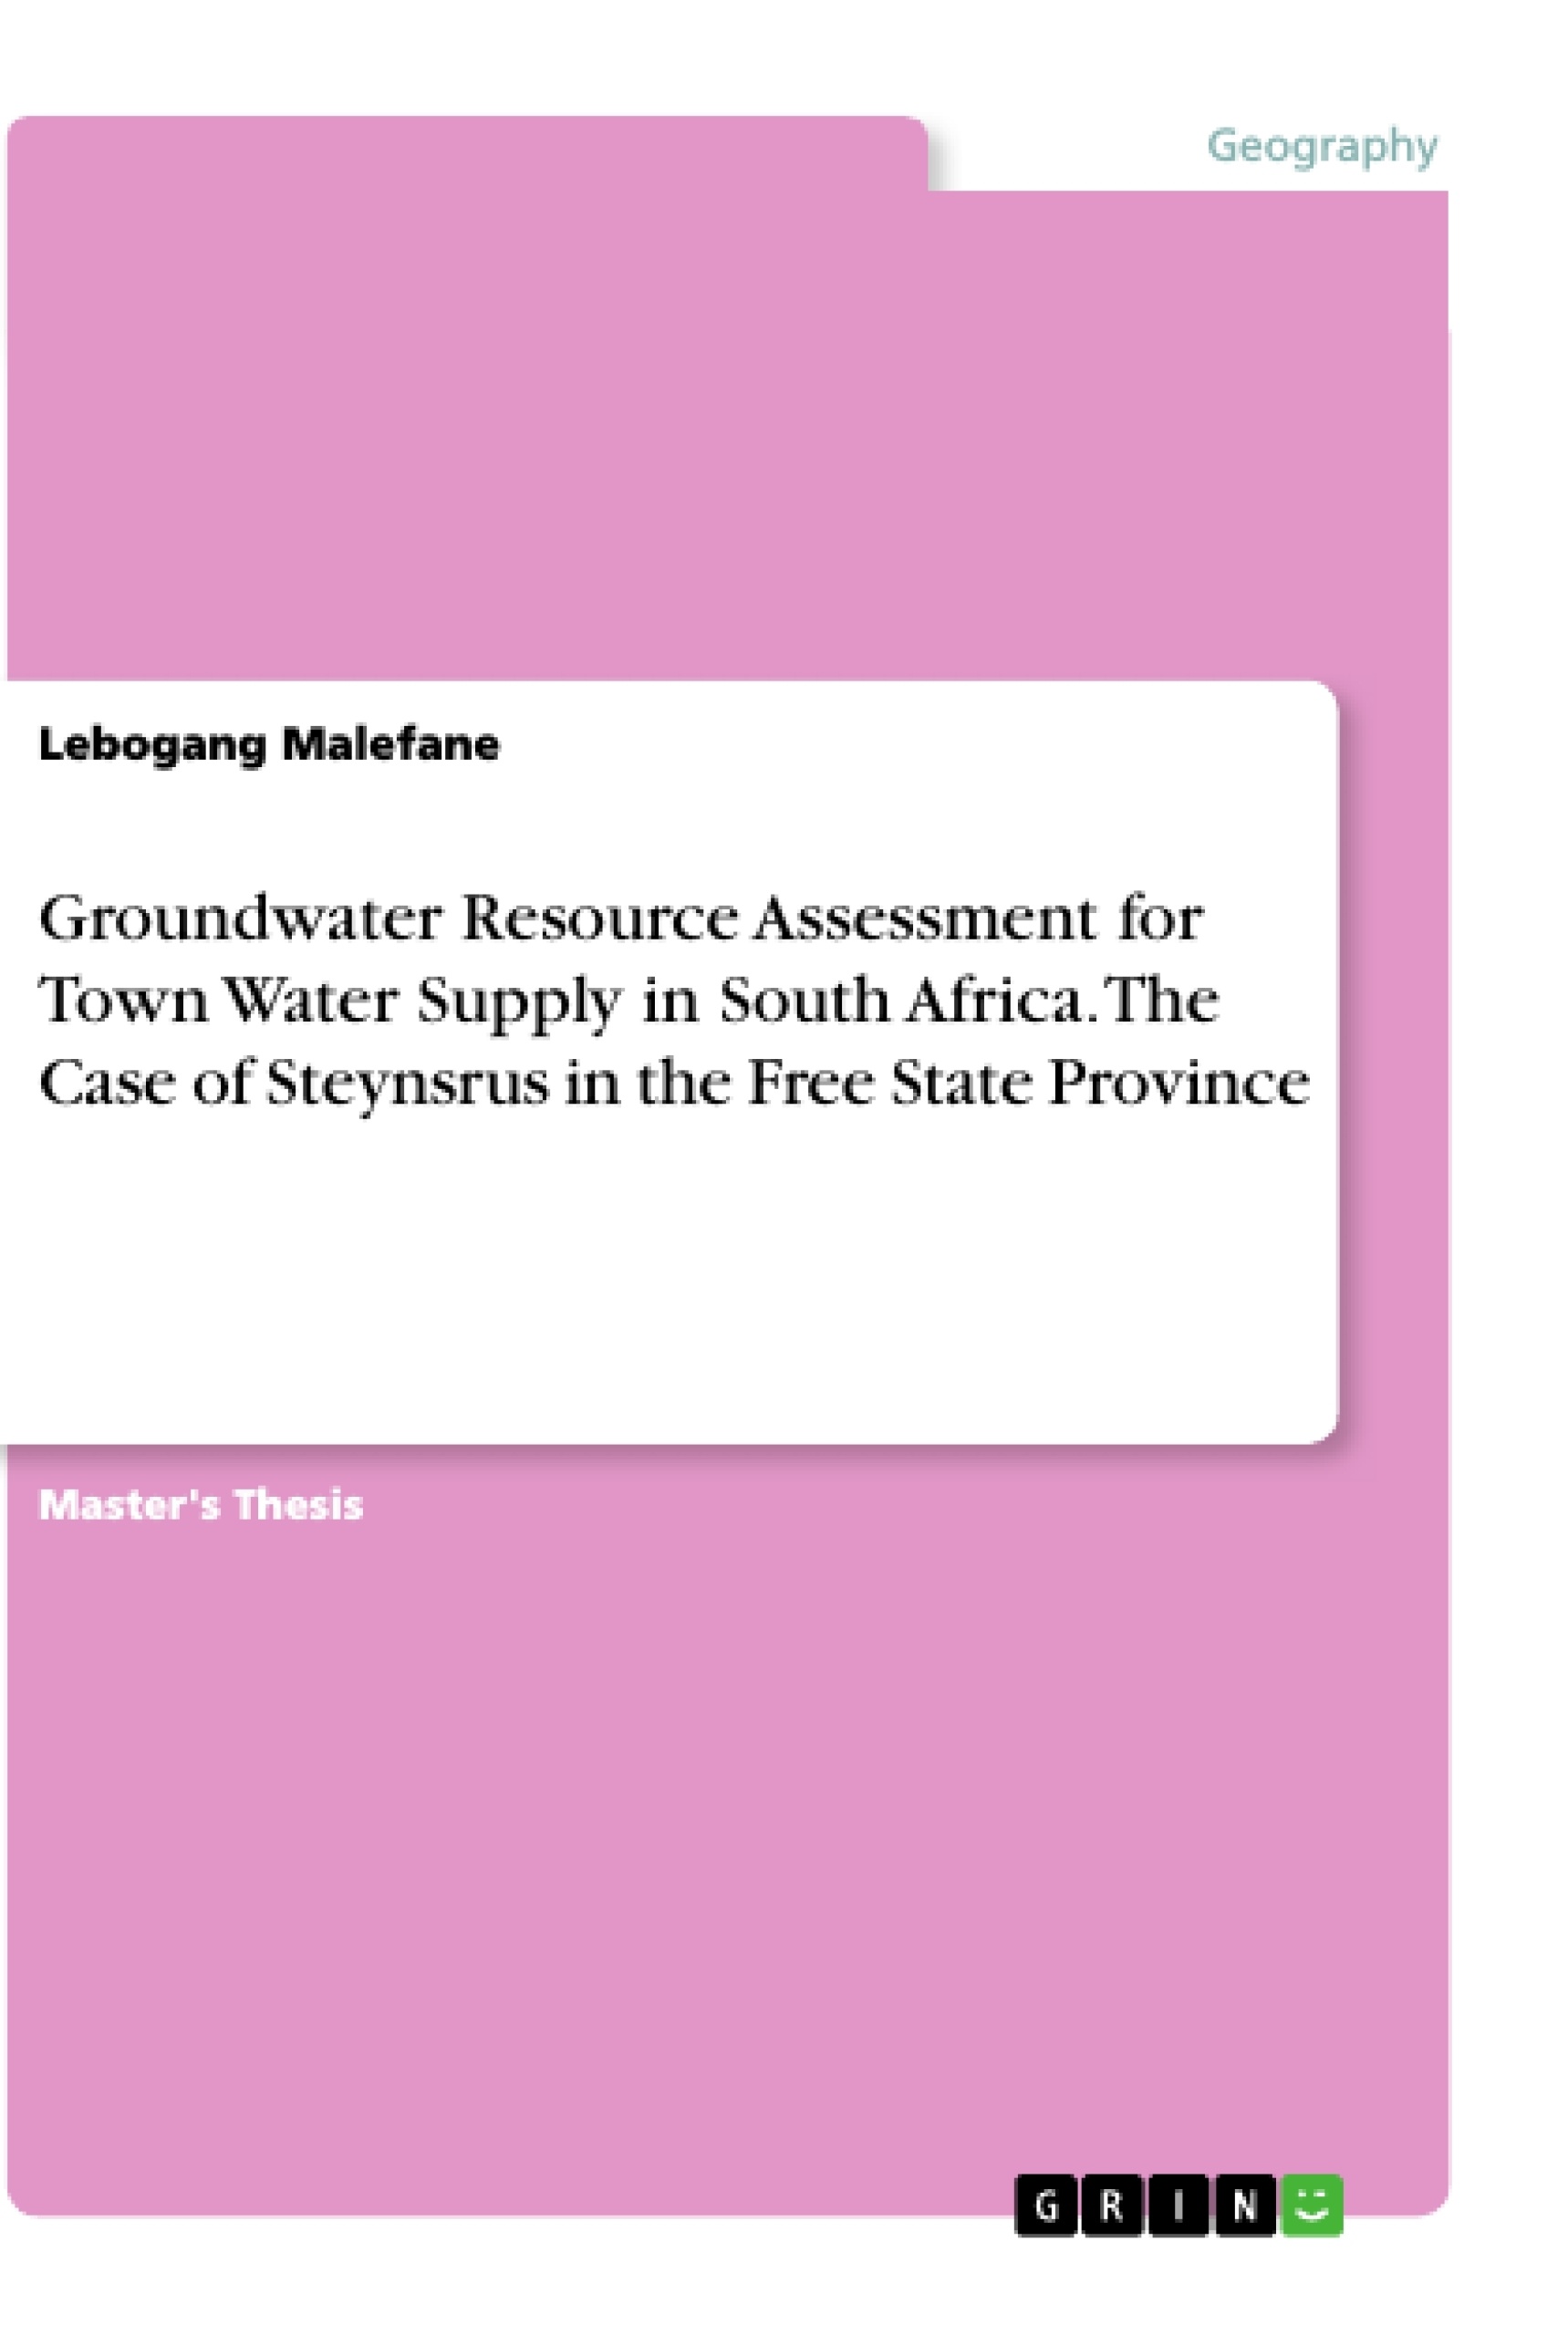 Titre: Groundwater Resource Assessment for Town Water Supply in South Africa. The Case of Steynsrus in the Free State Province